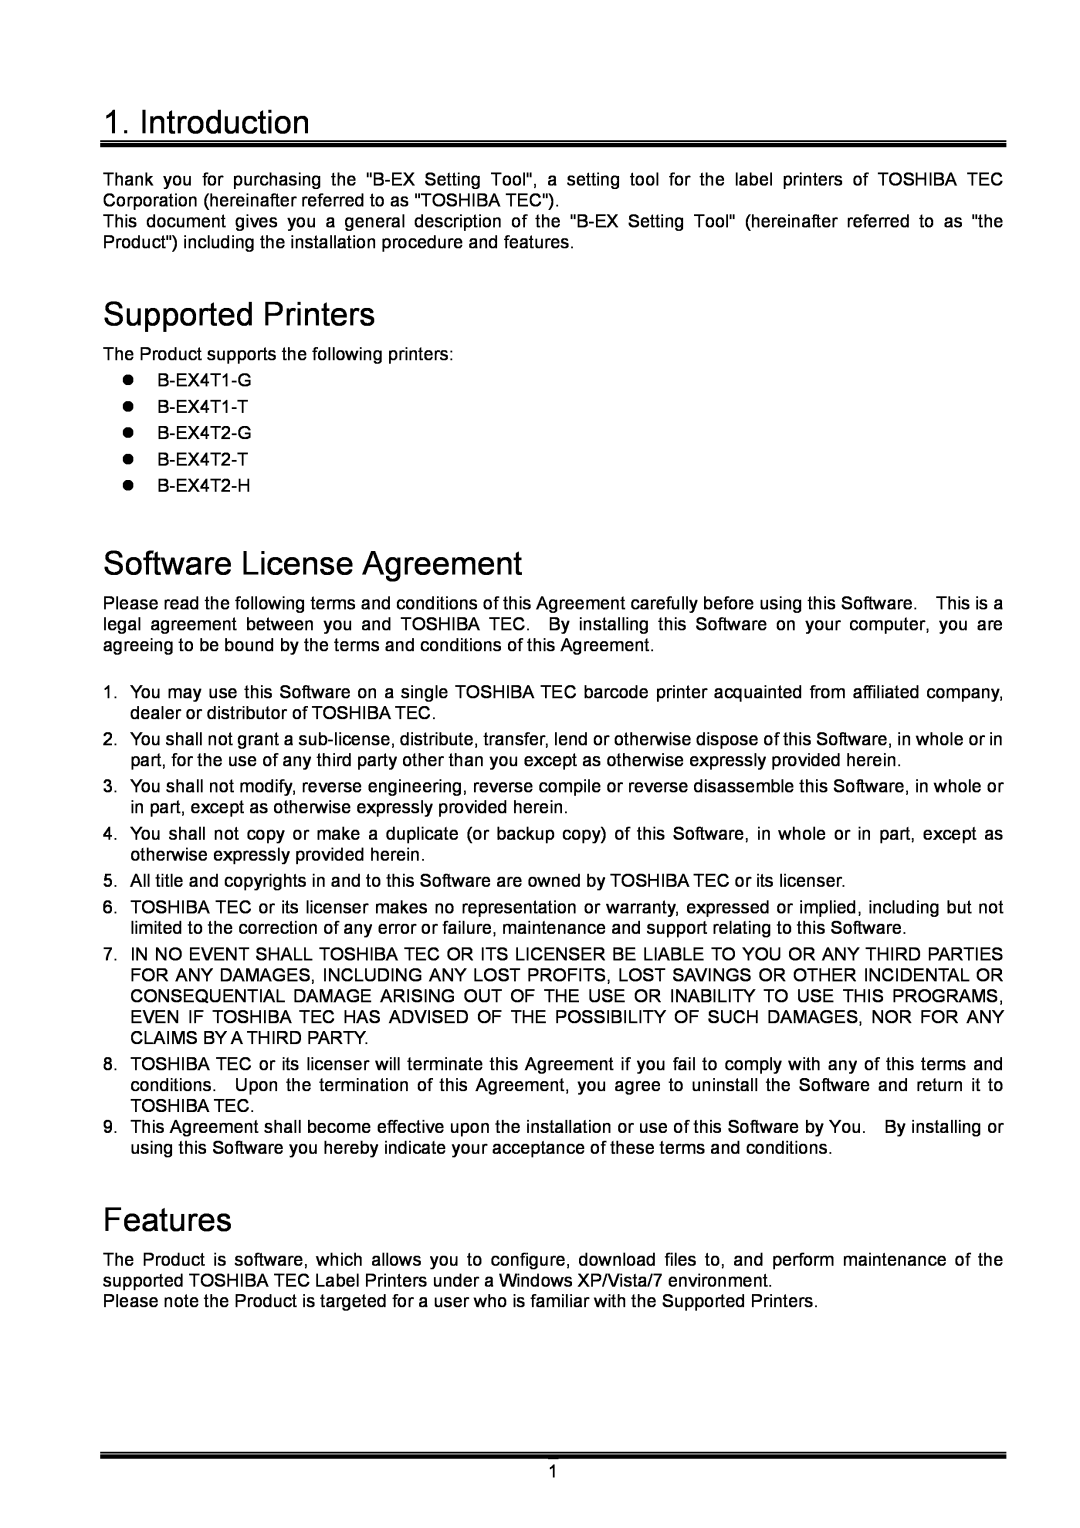 Toshiba B-EX operation manual Introduction, Supported Printers, Software License Agreement, Features 